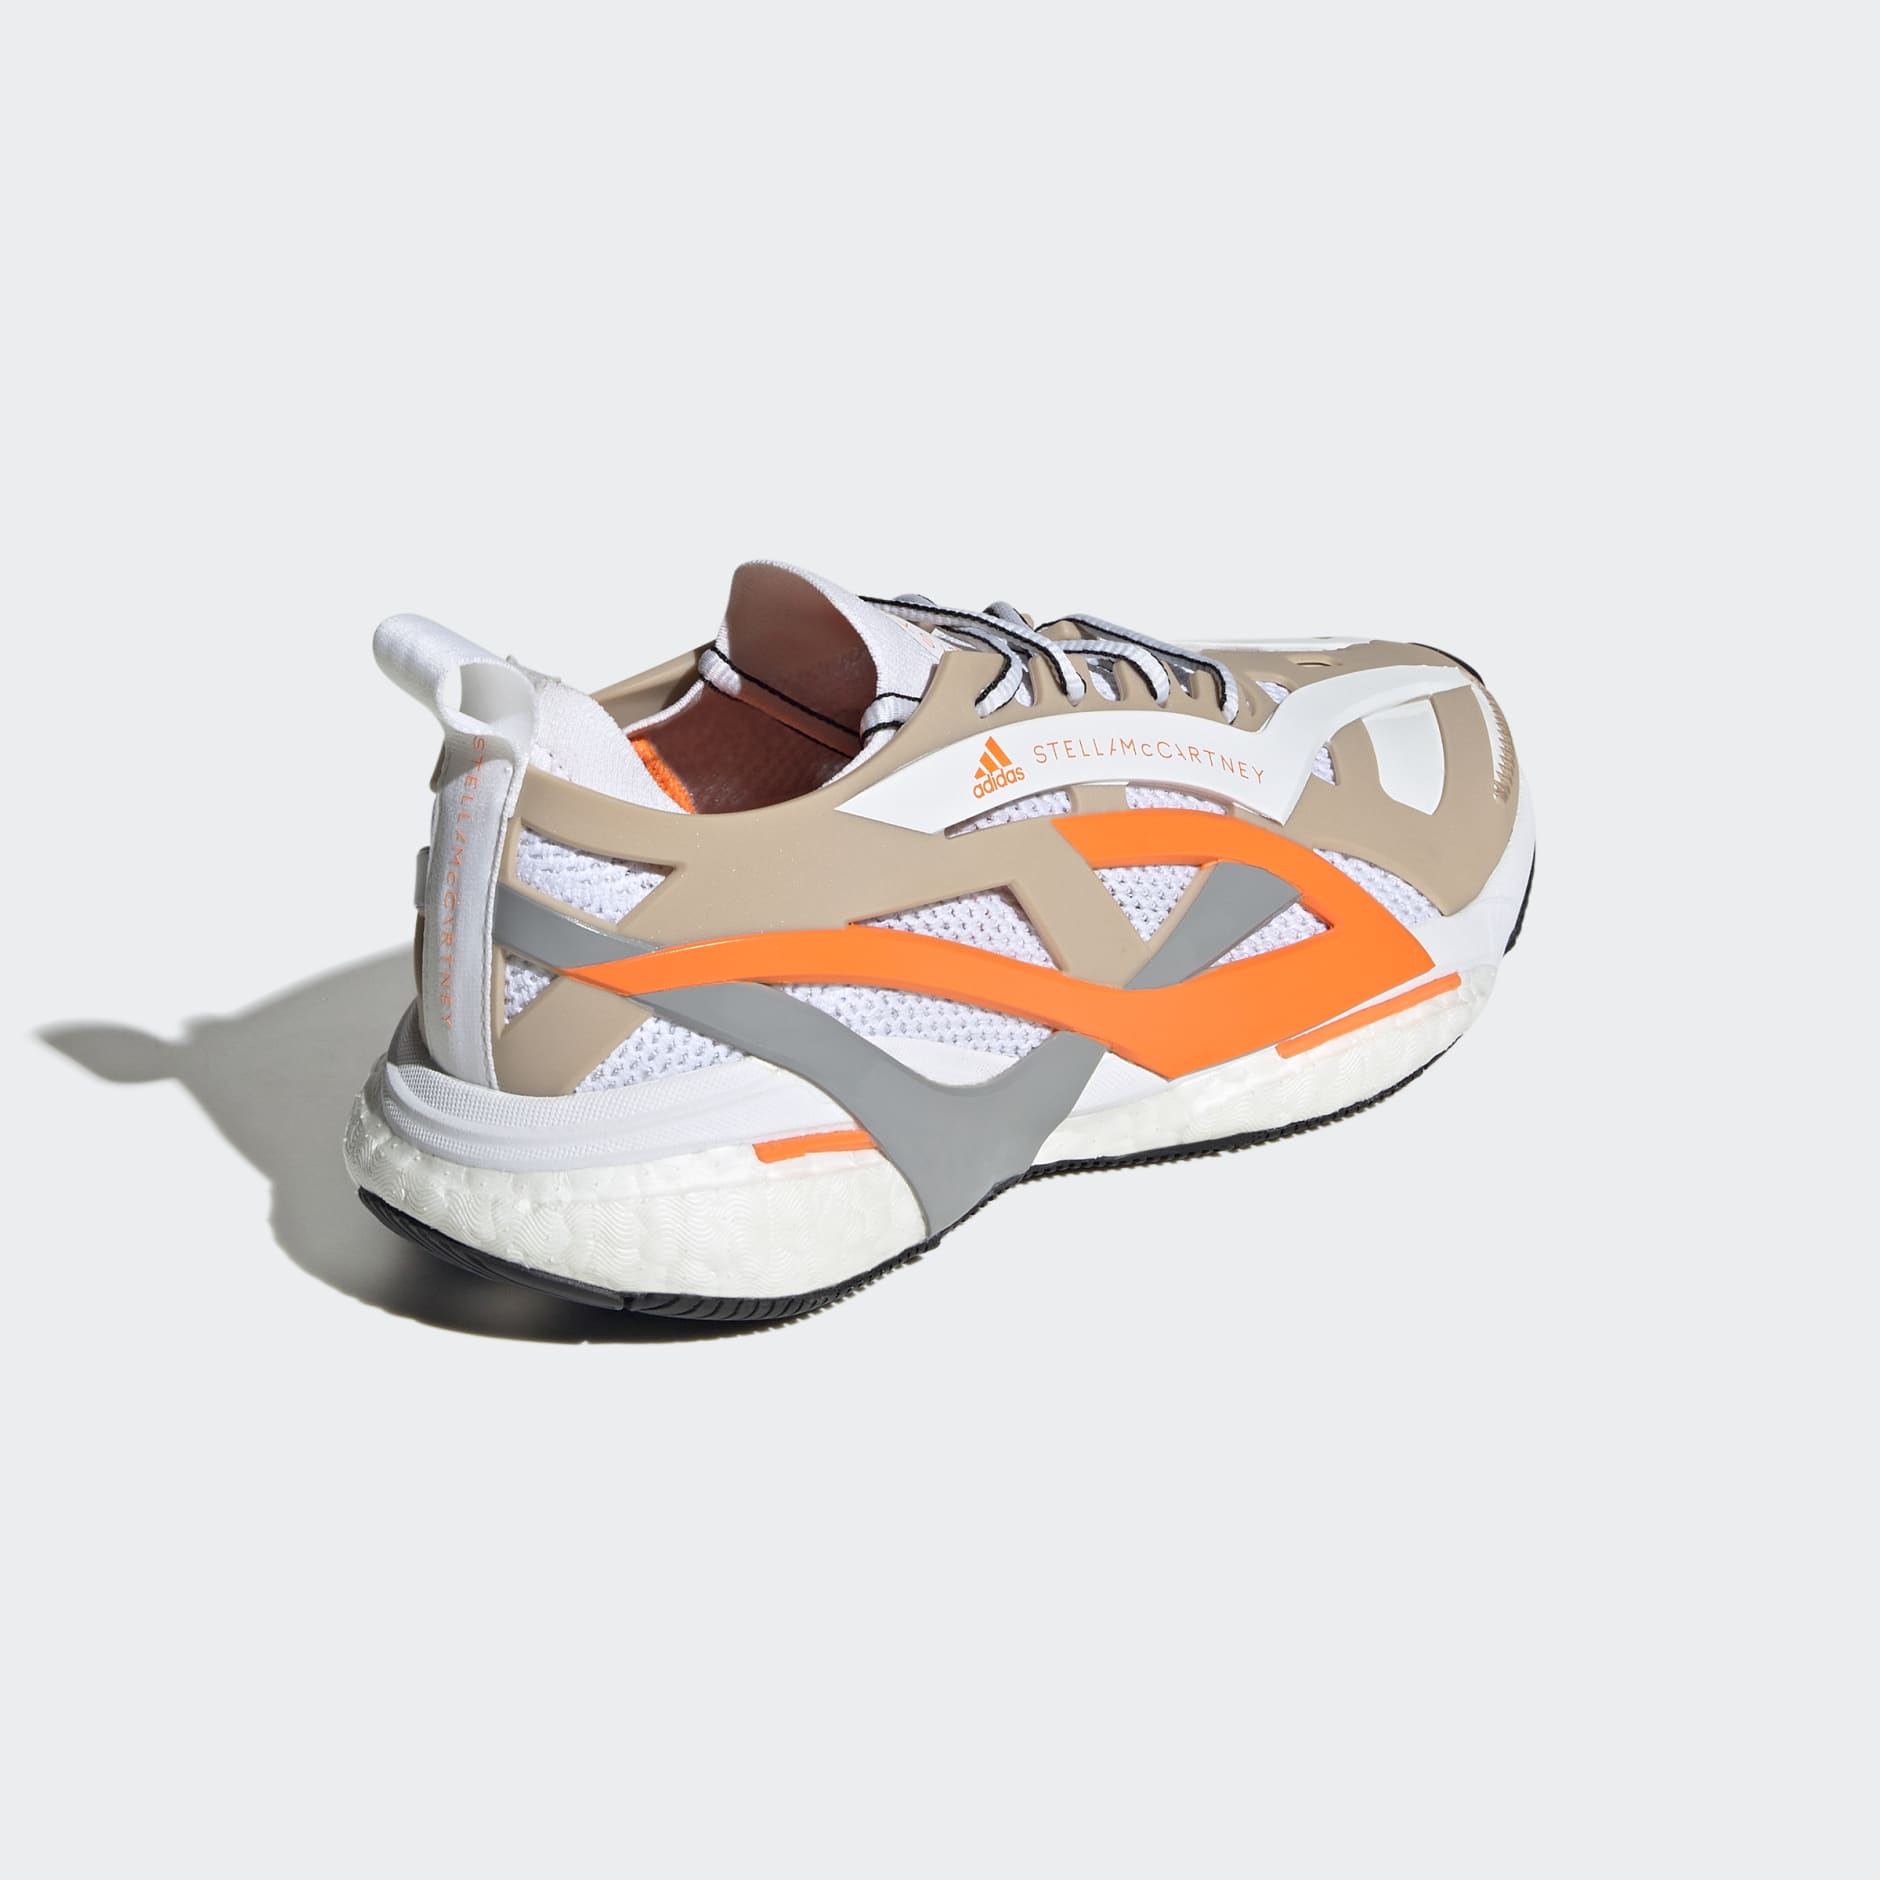 adidas by Stella McCartney SolarGlide Shoes